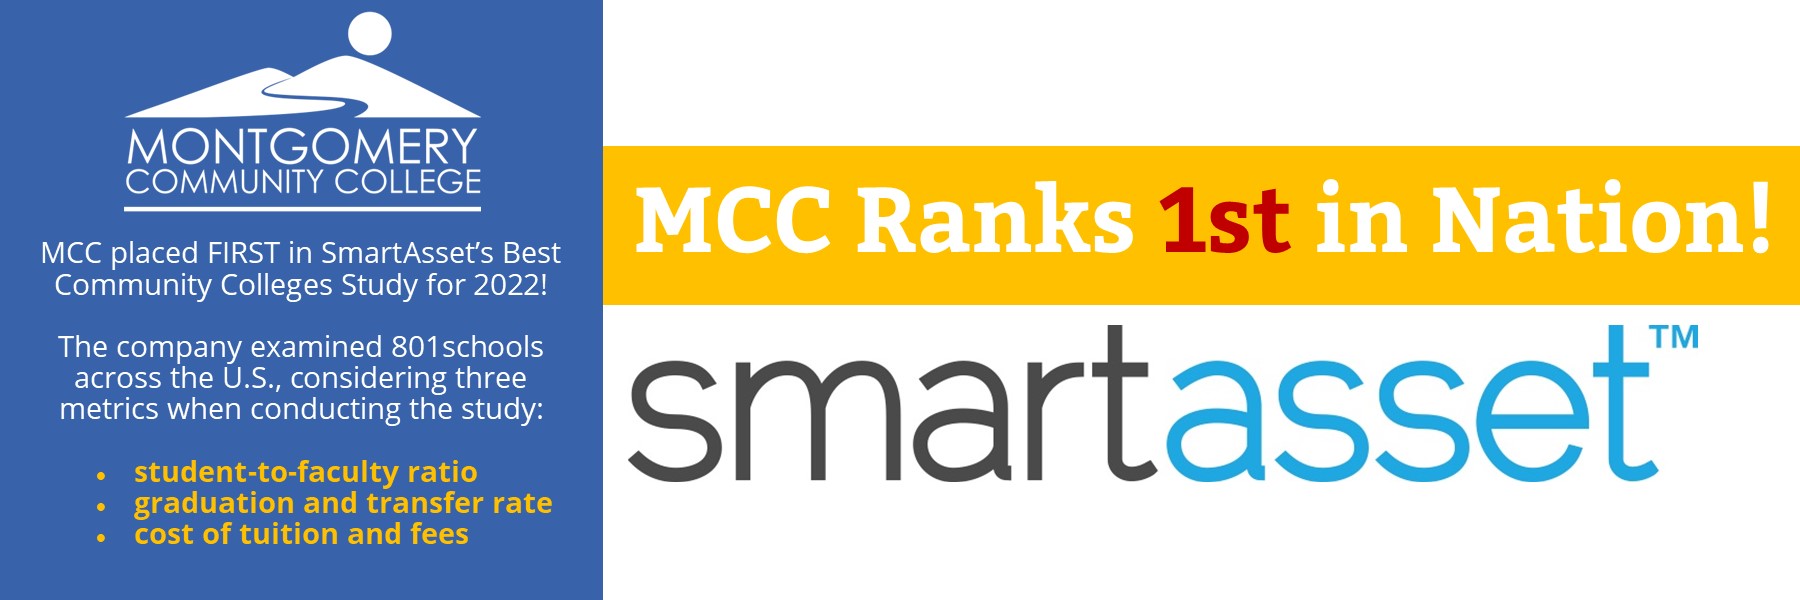 MCC placed fourth in smartassets best community colleges study for 2021! The company examined 820 schools across the U.S., considering three metrics when conducting the study: student to faculty ratio, graduation and transfer rate, and cost of tuition and fees. MCC is 4th out of 820!